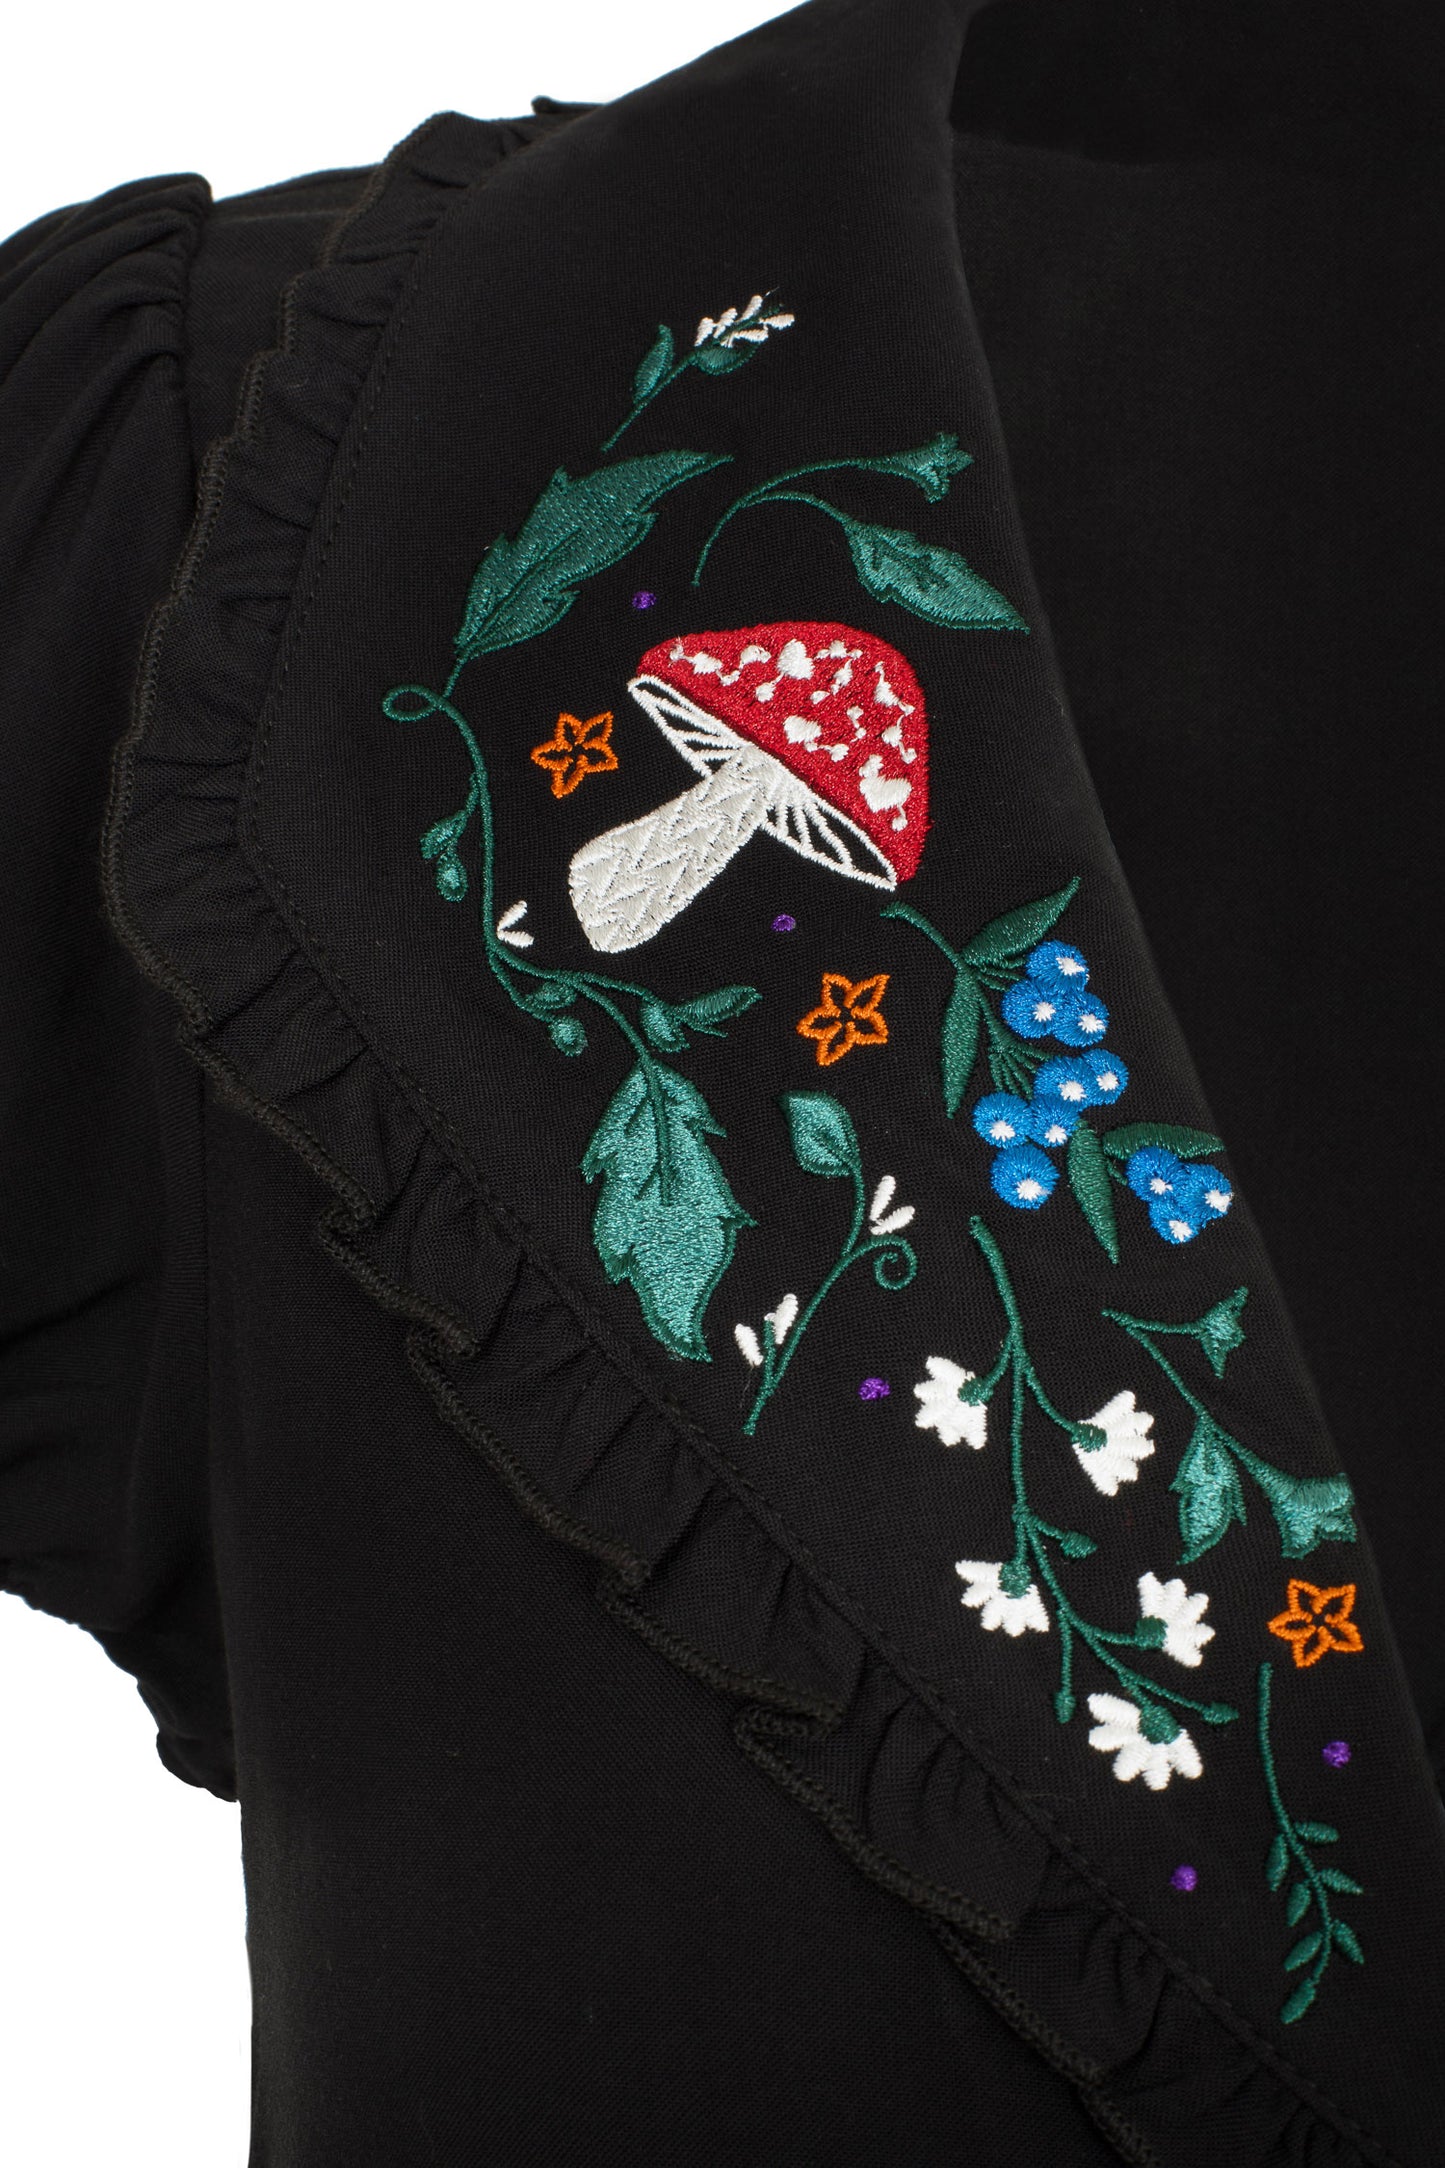 Close up of the embroidered mushroom, flowers and leaves on the Natura blouse collar